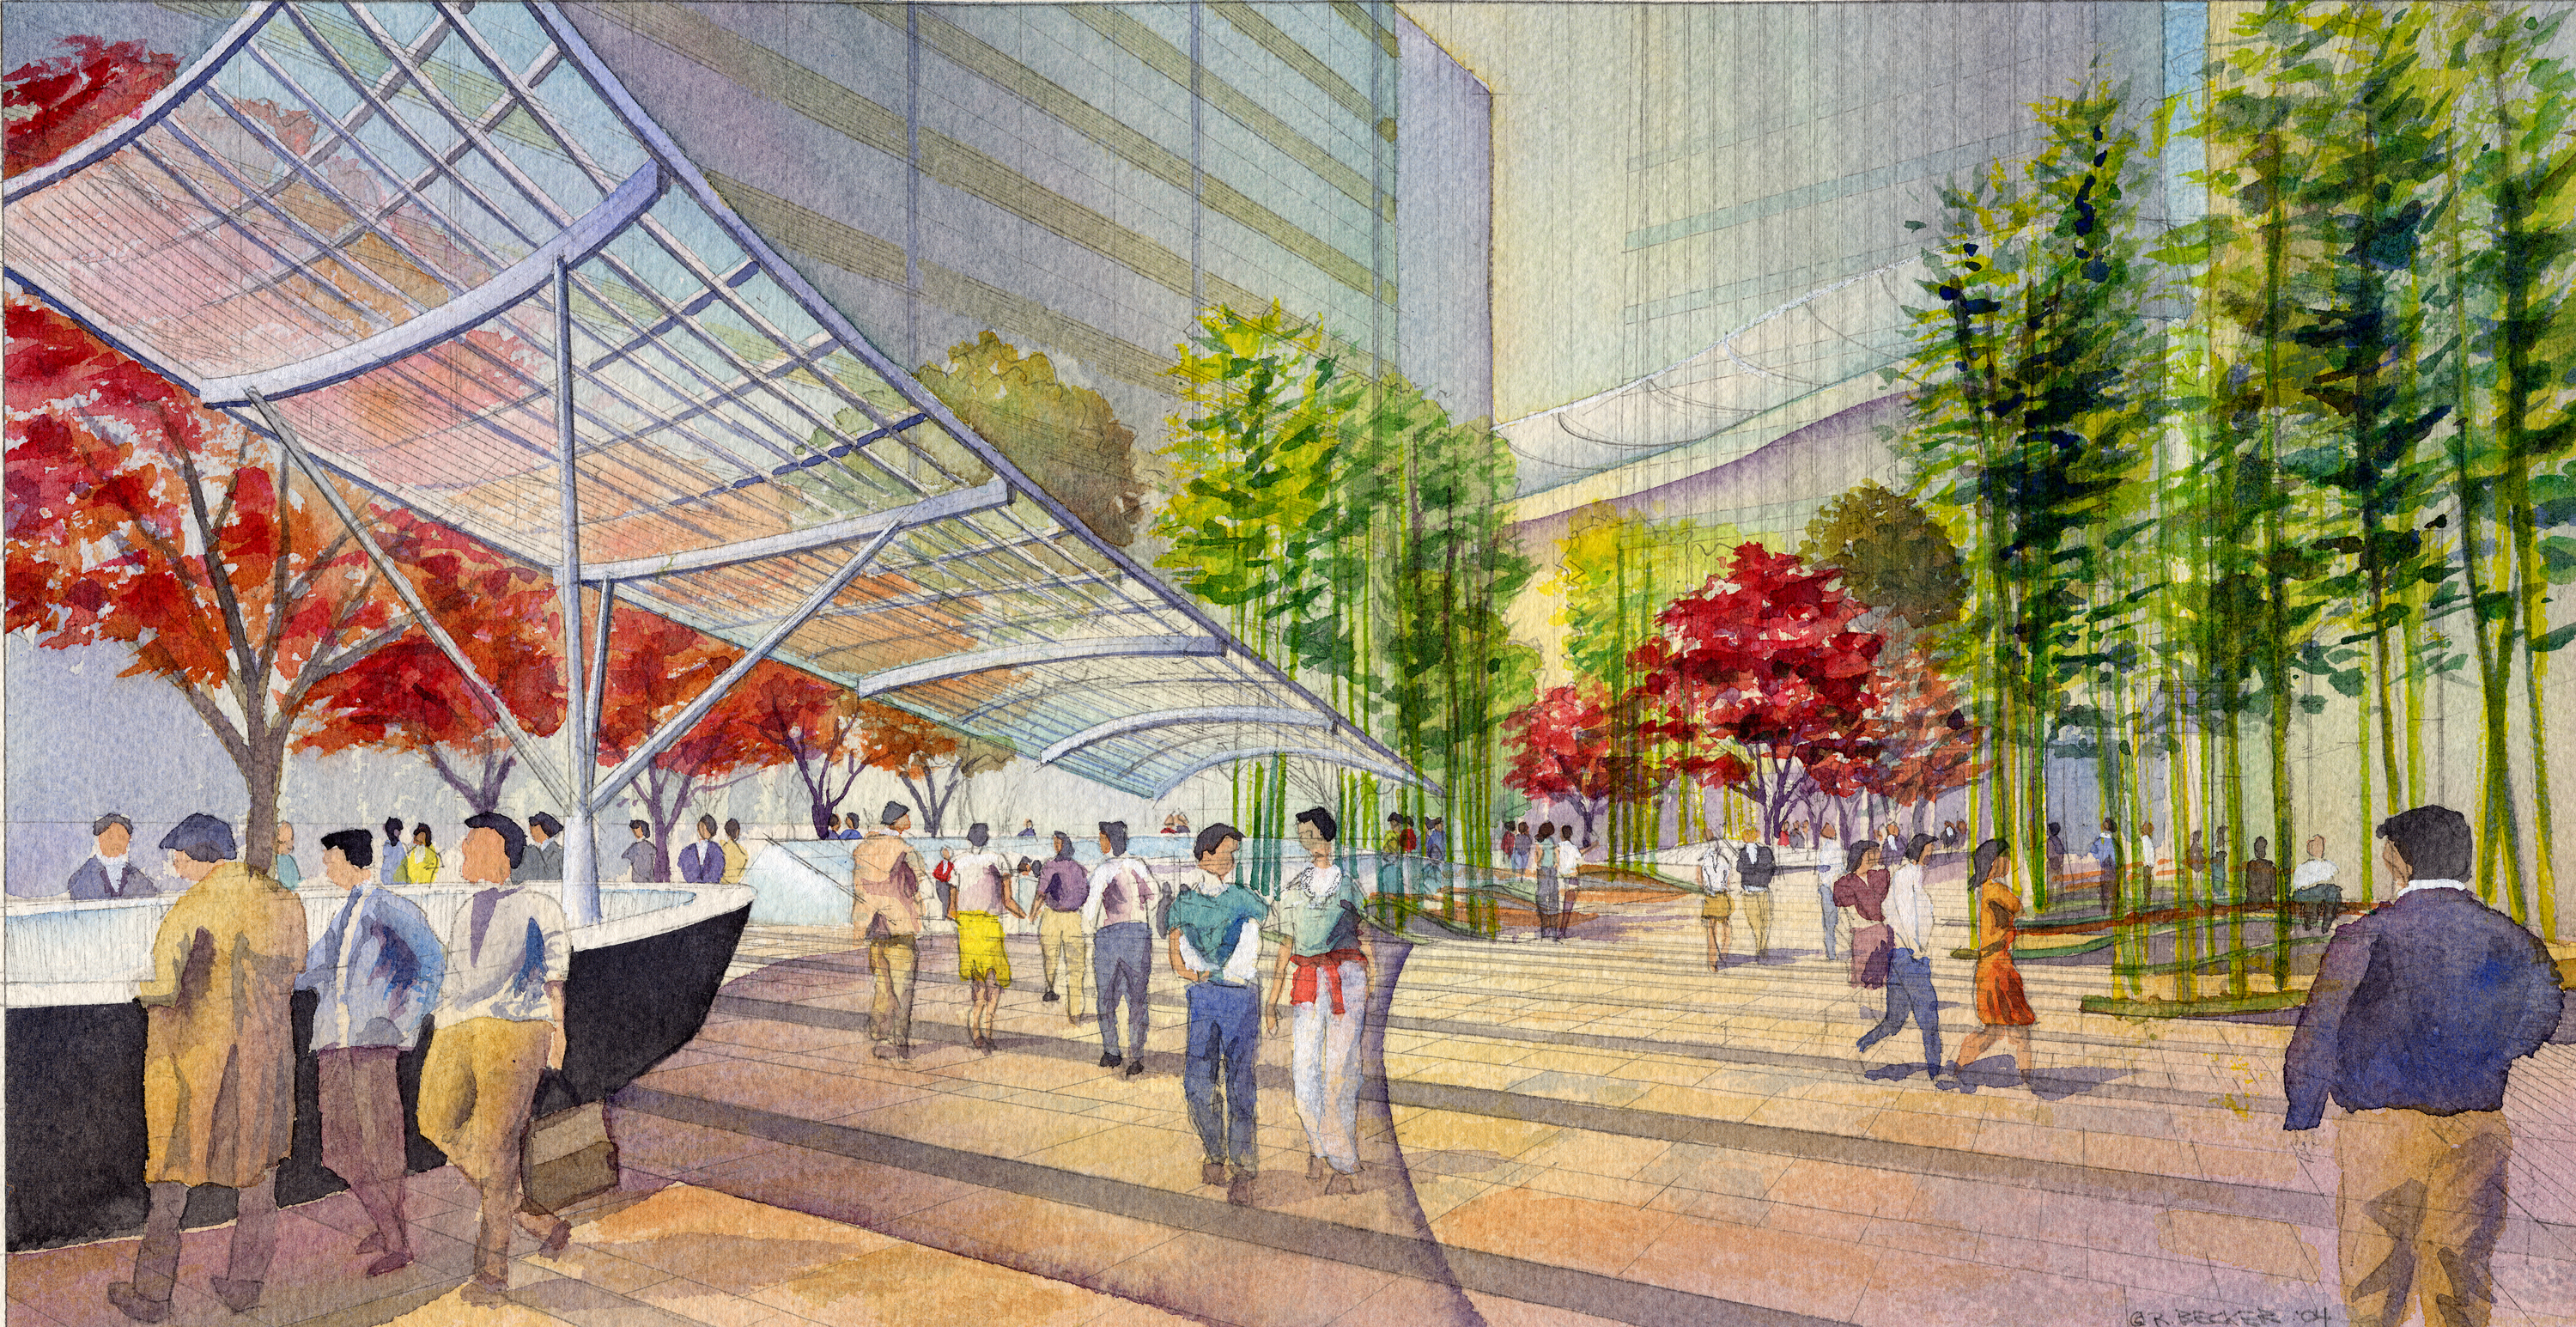 EDAW_Roppongi_Canopy_Architectural_Rendering_Watercolor